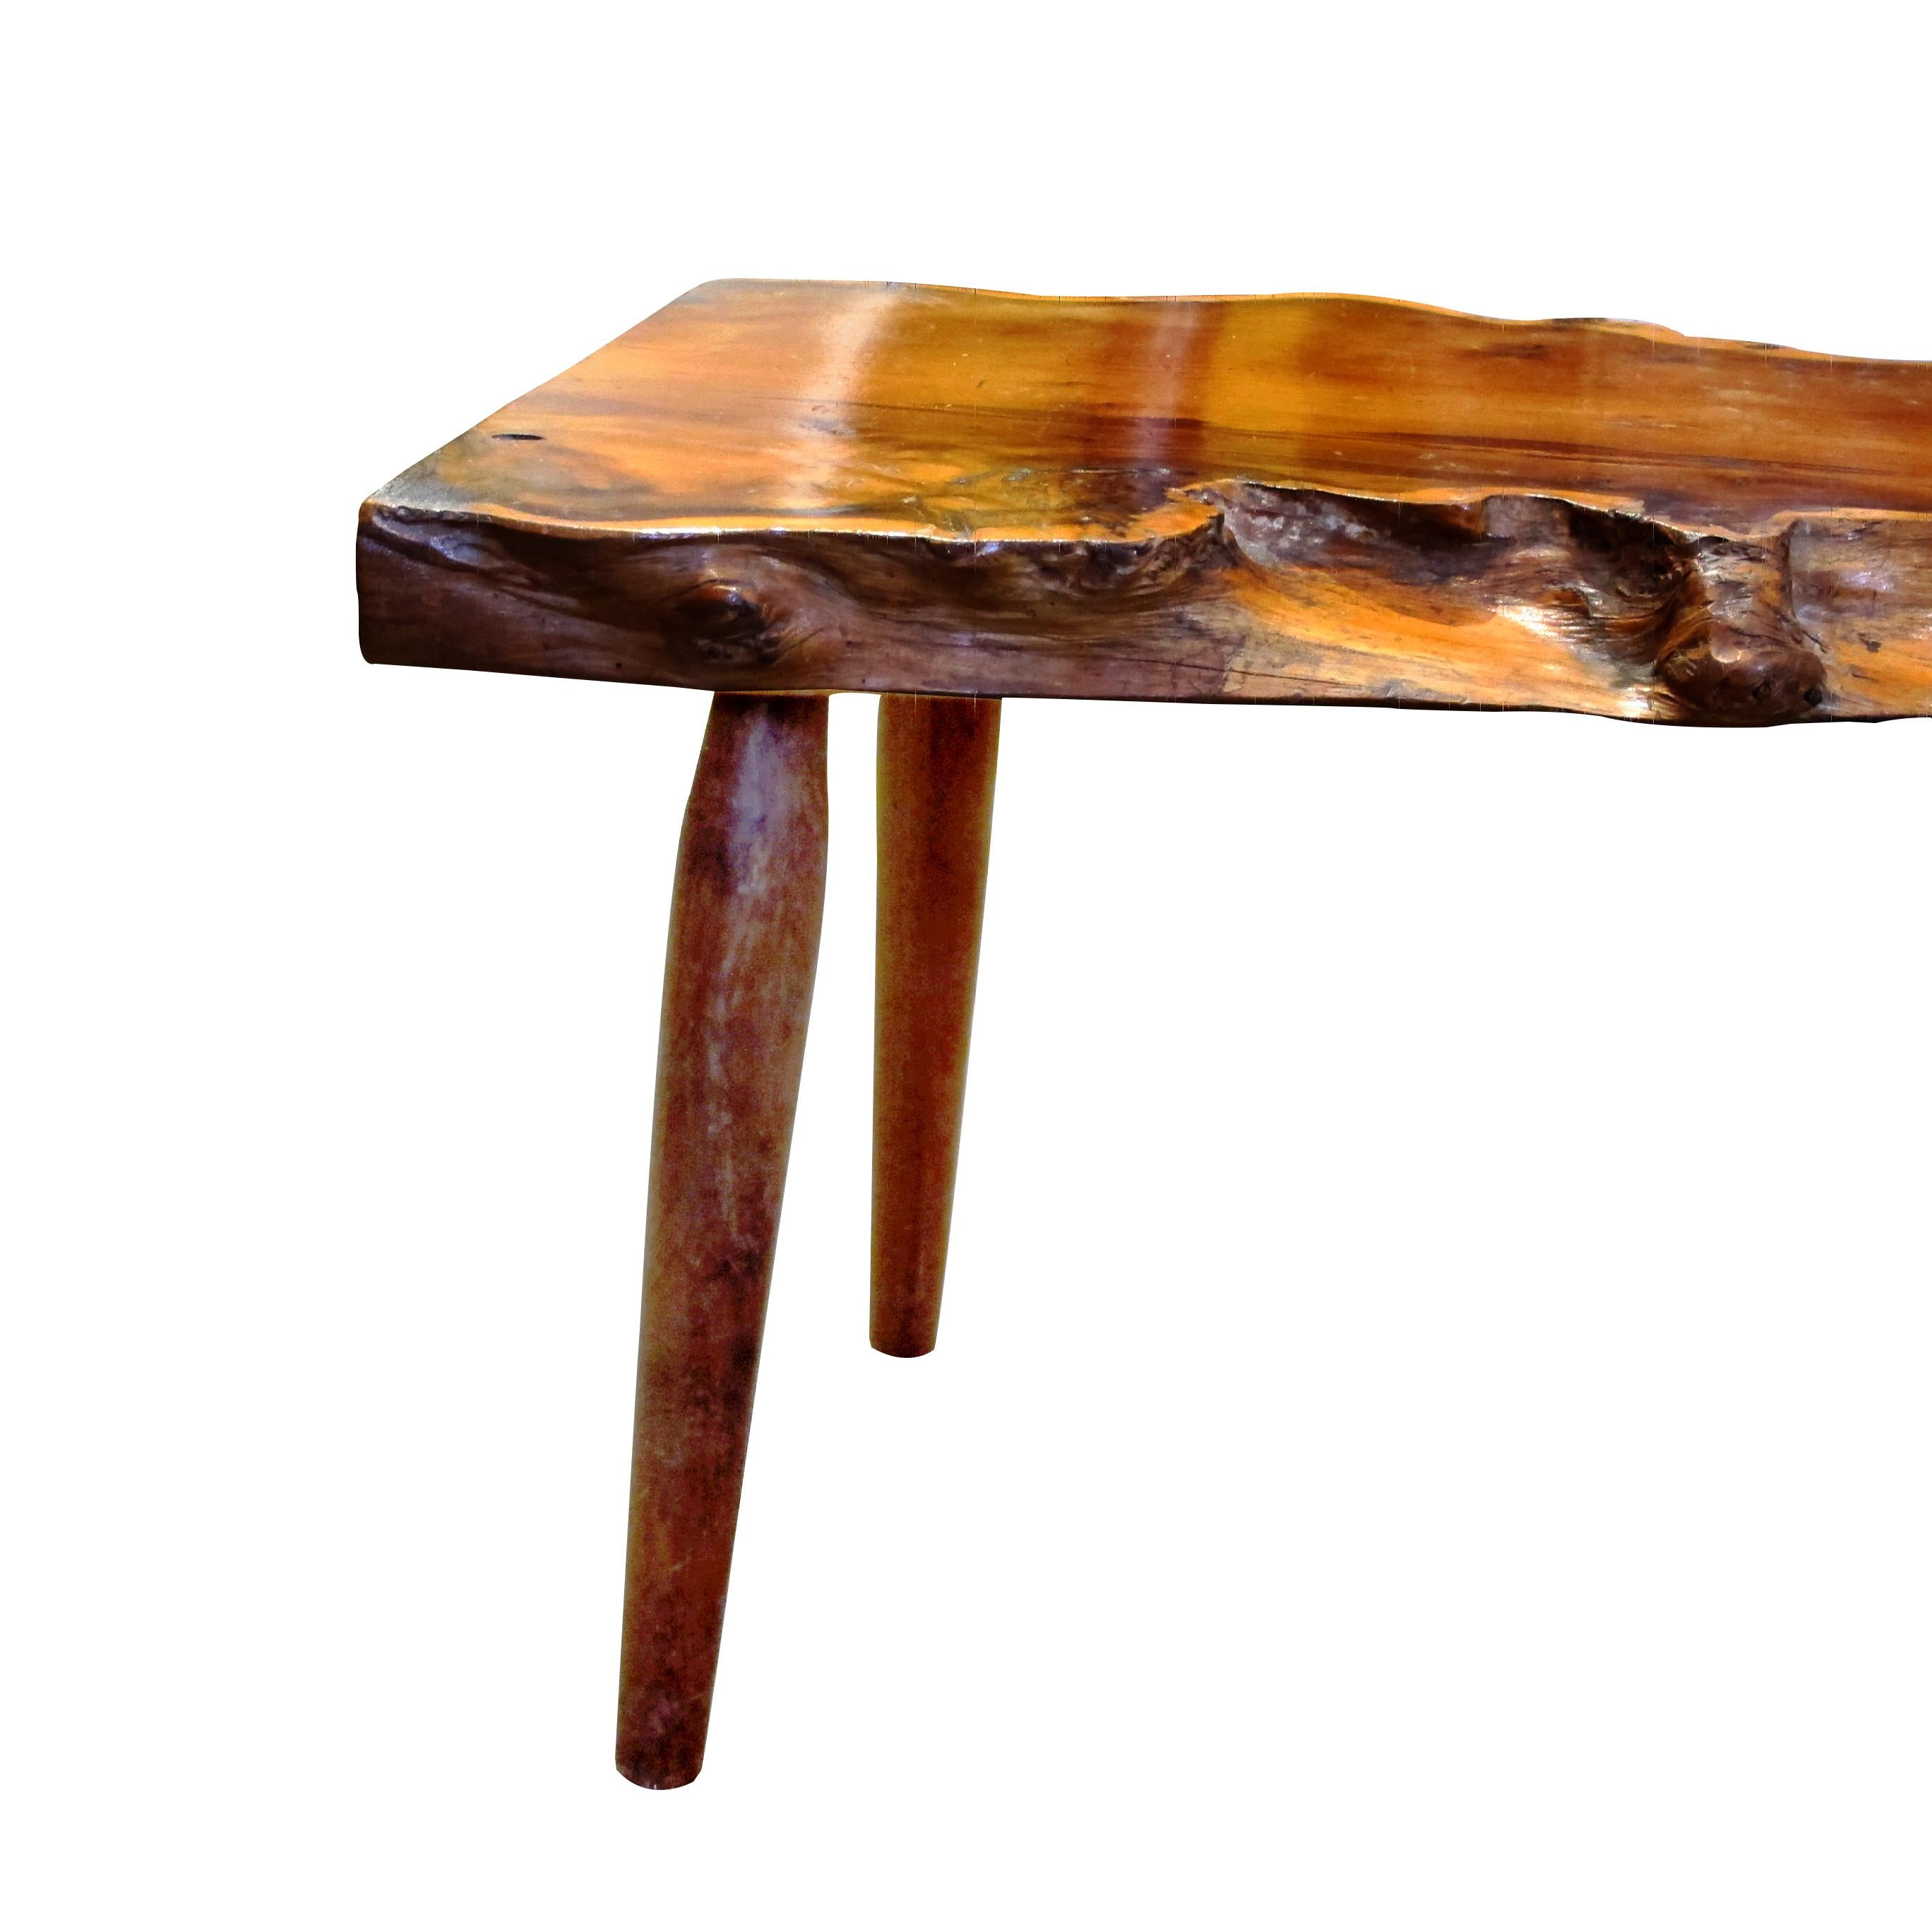 1960s Live Edge Yew Wood Bench Attributed to Reynolds Of Ludlow, English For Sale 1